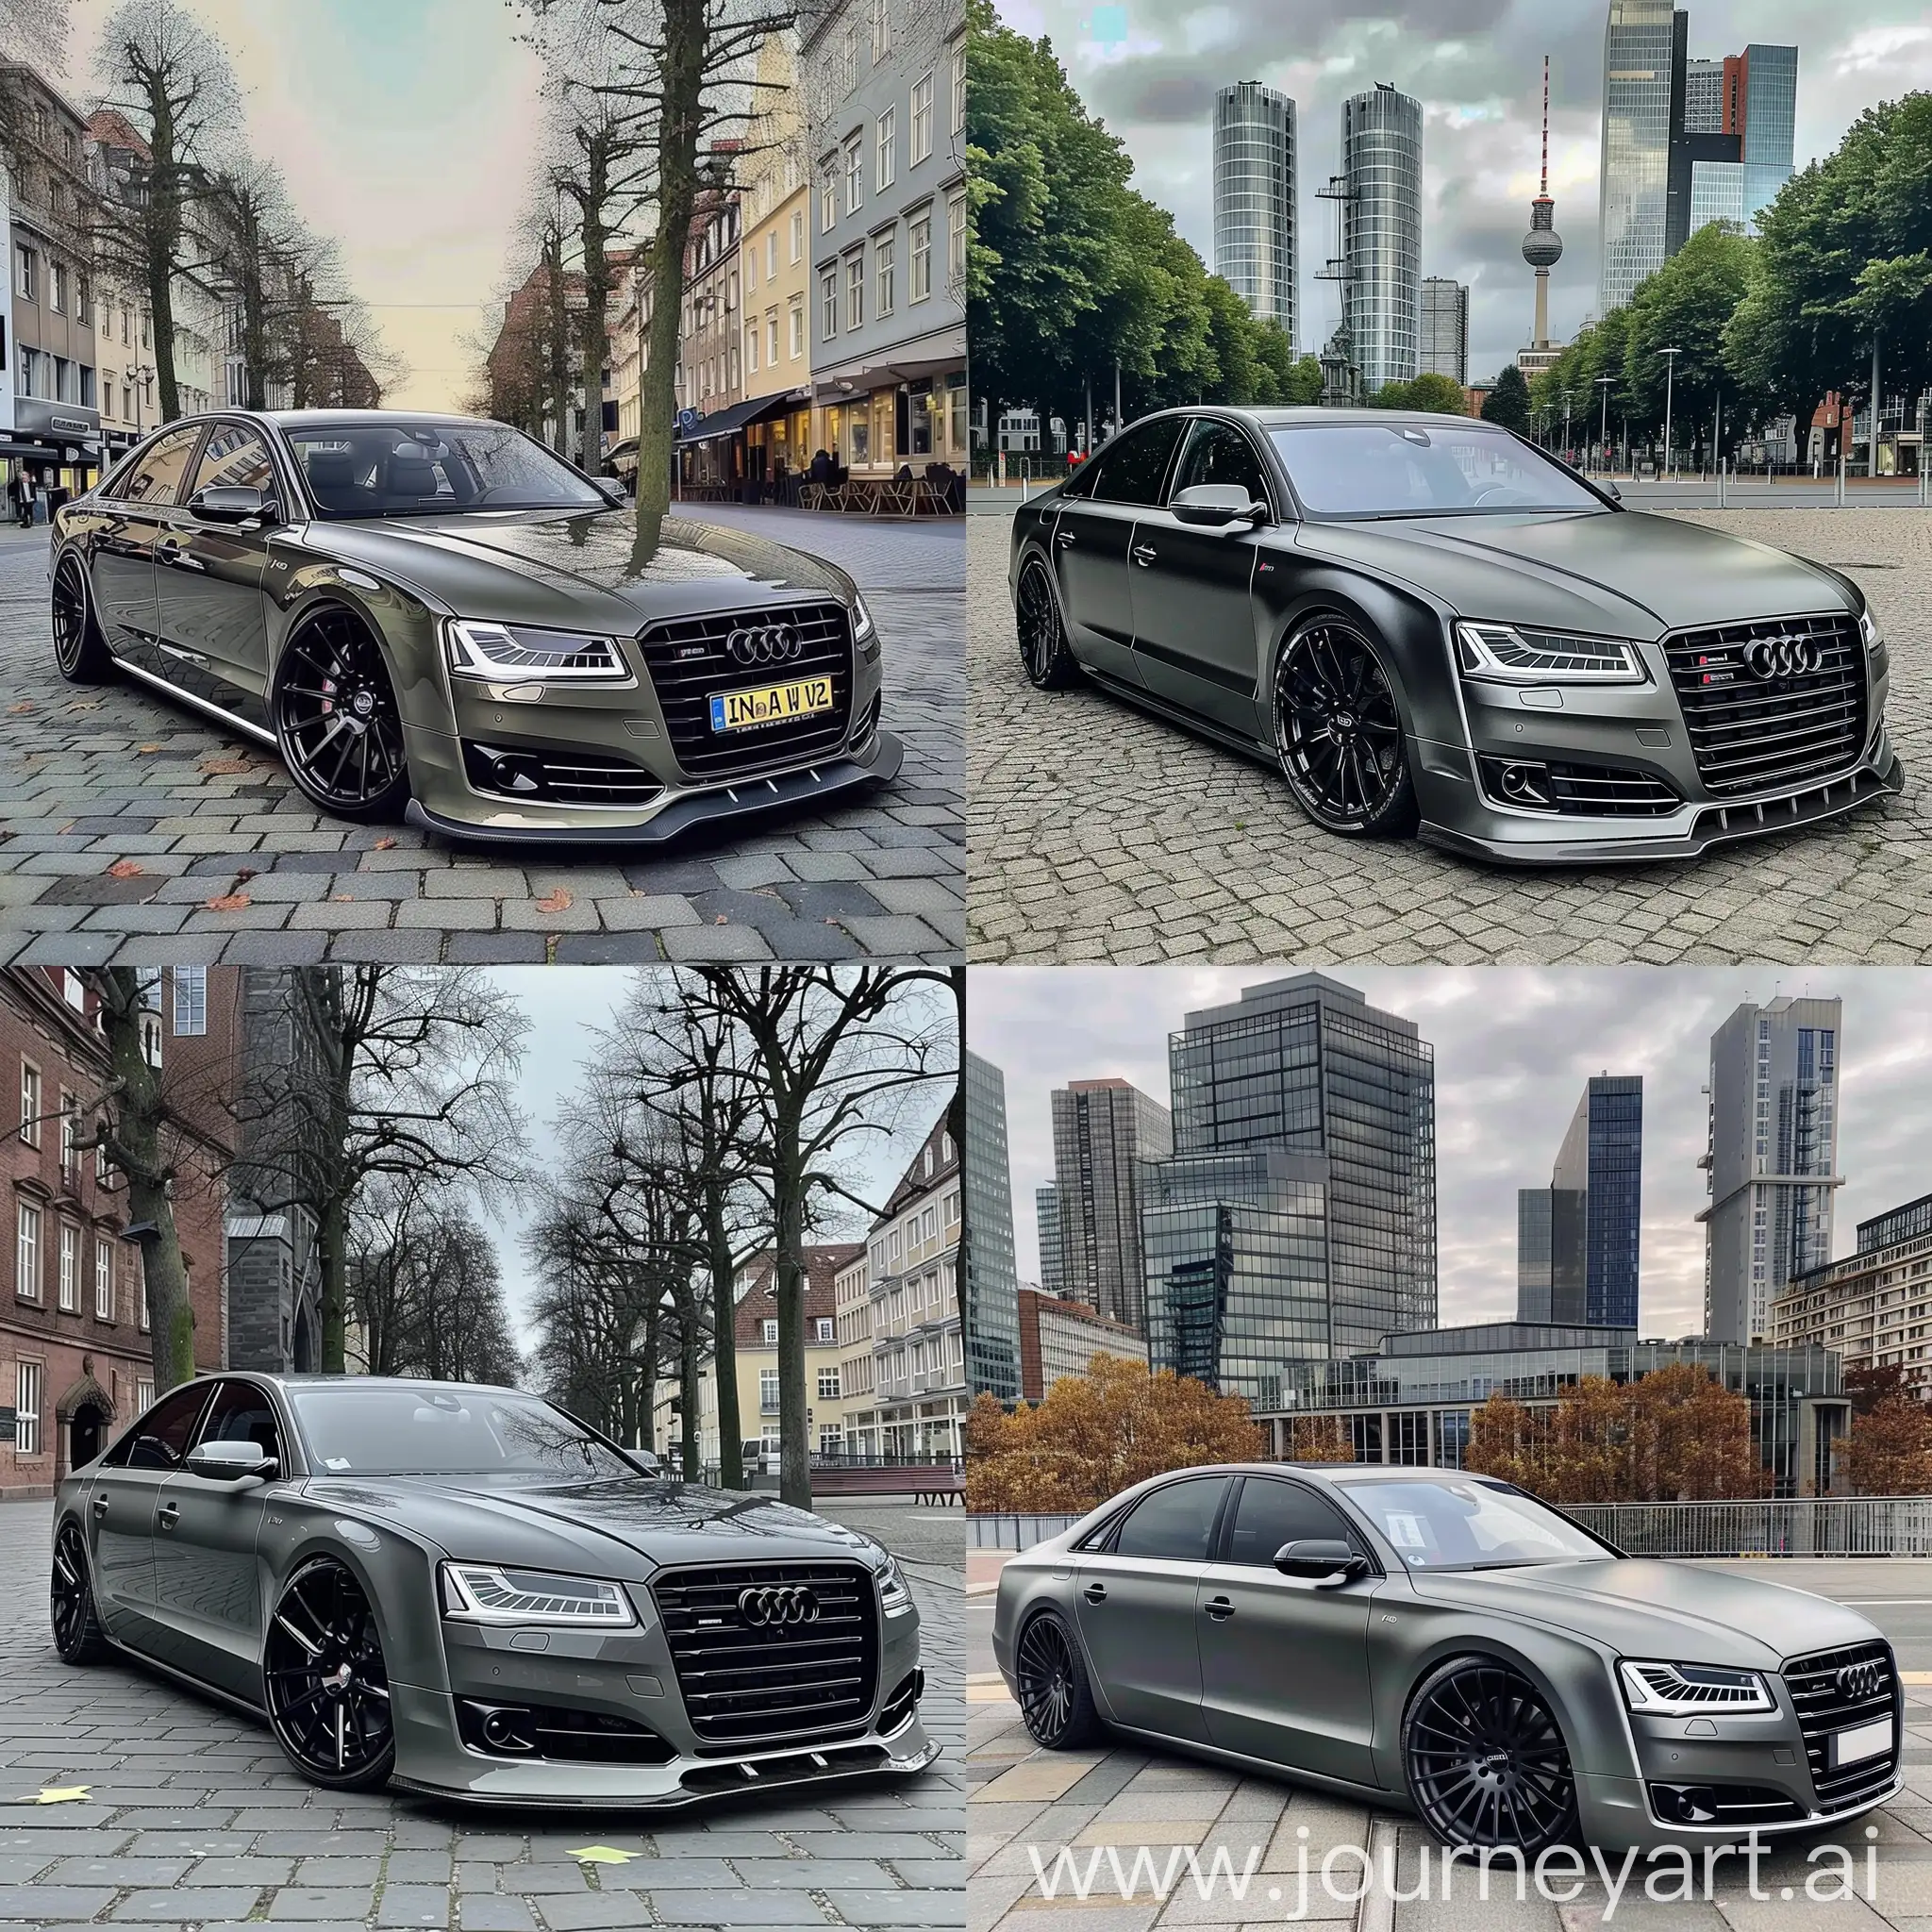 Realistic-Gray-Audi-A8-2008-with-Black-Rims-Parked-in-Urban-Germany